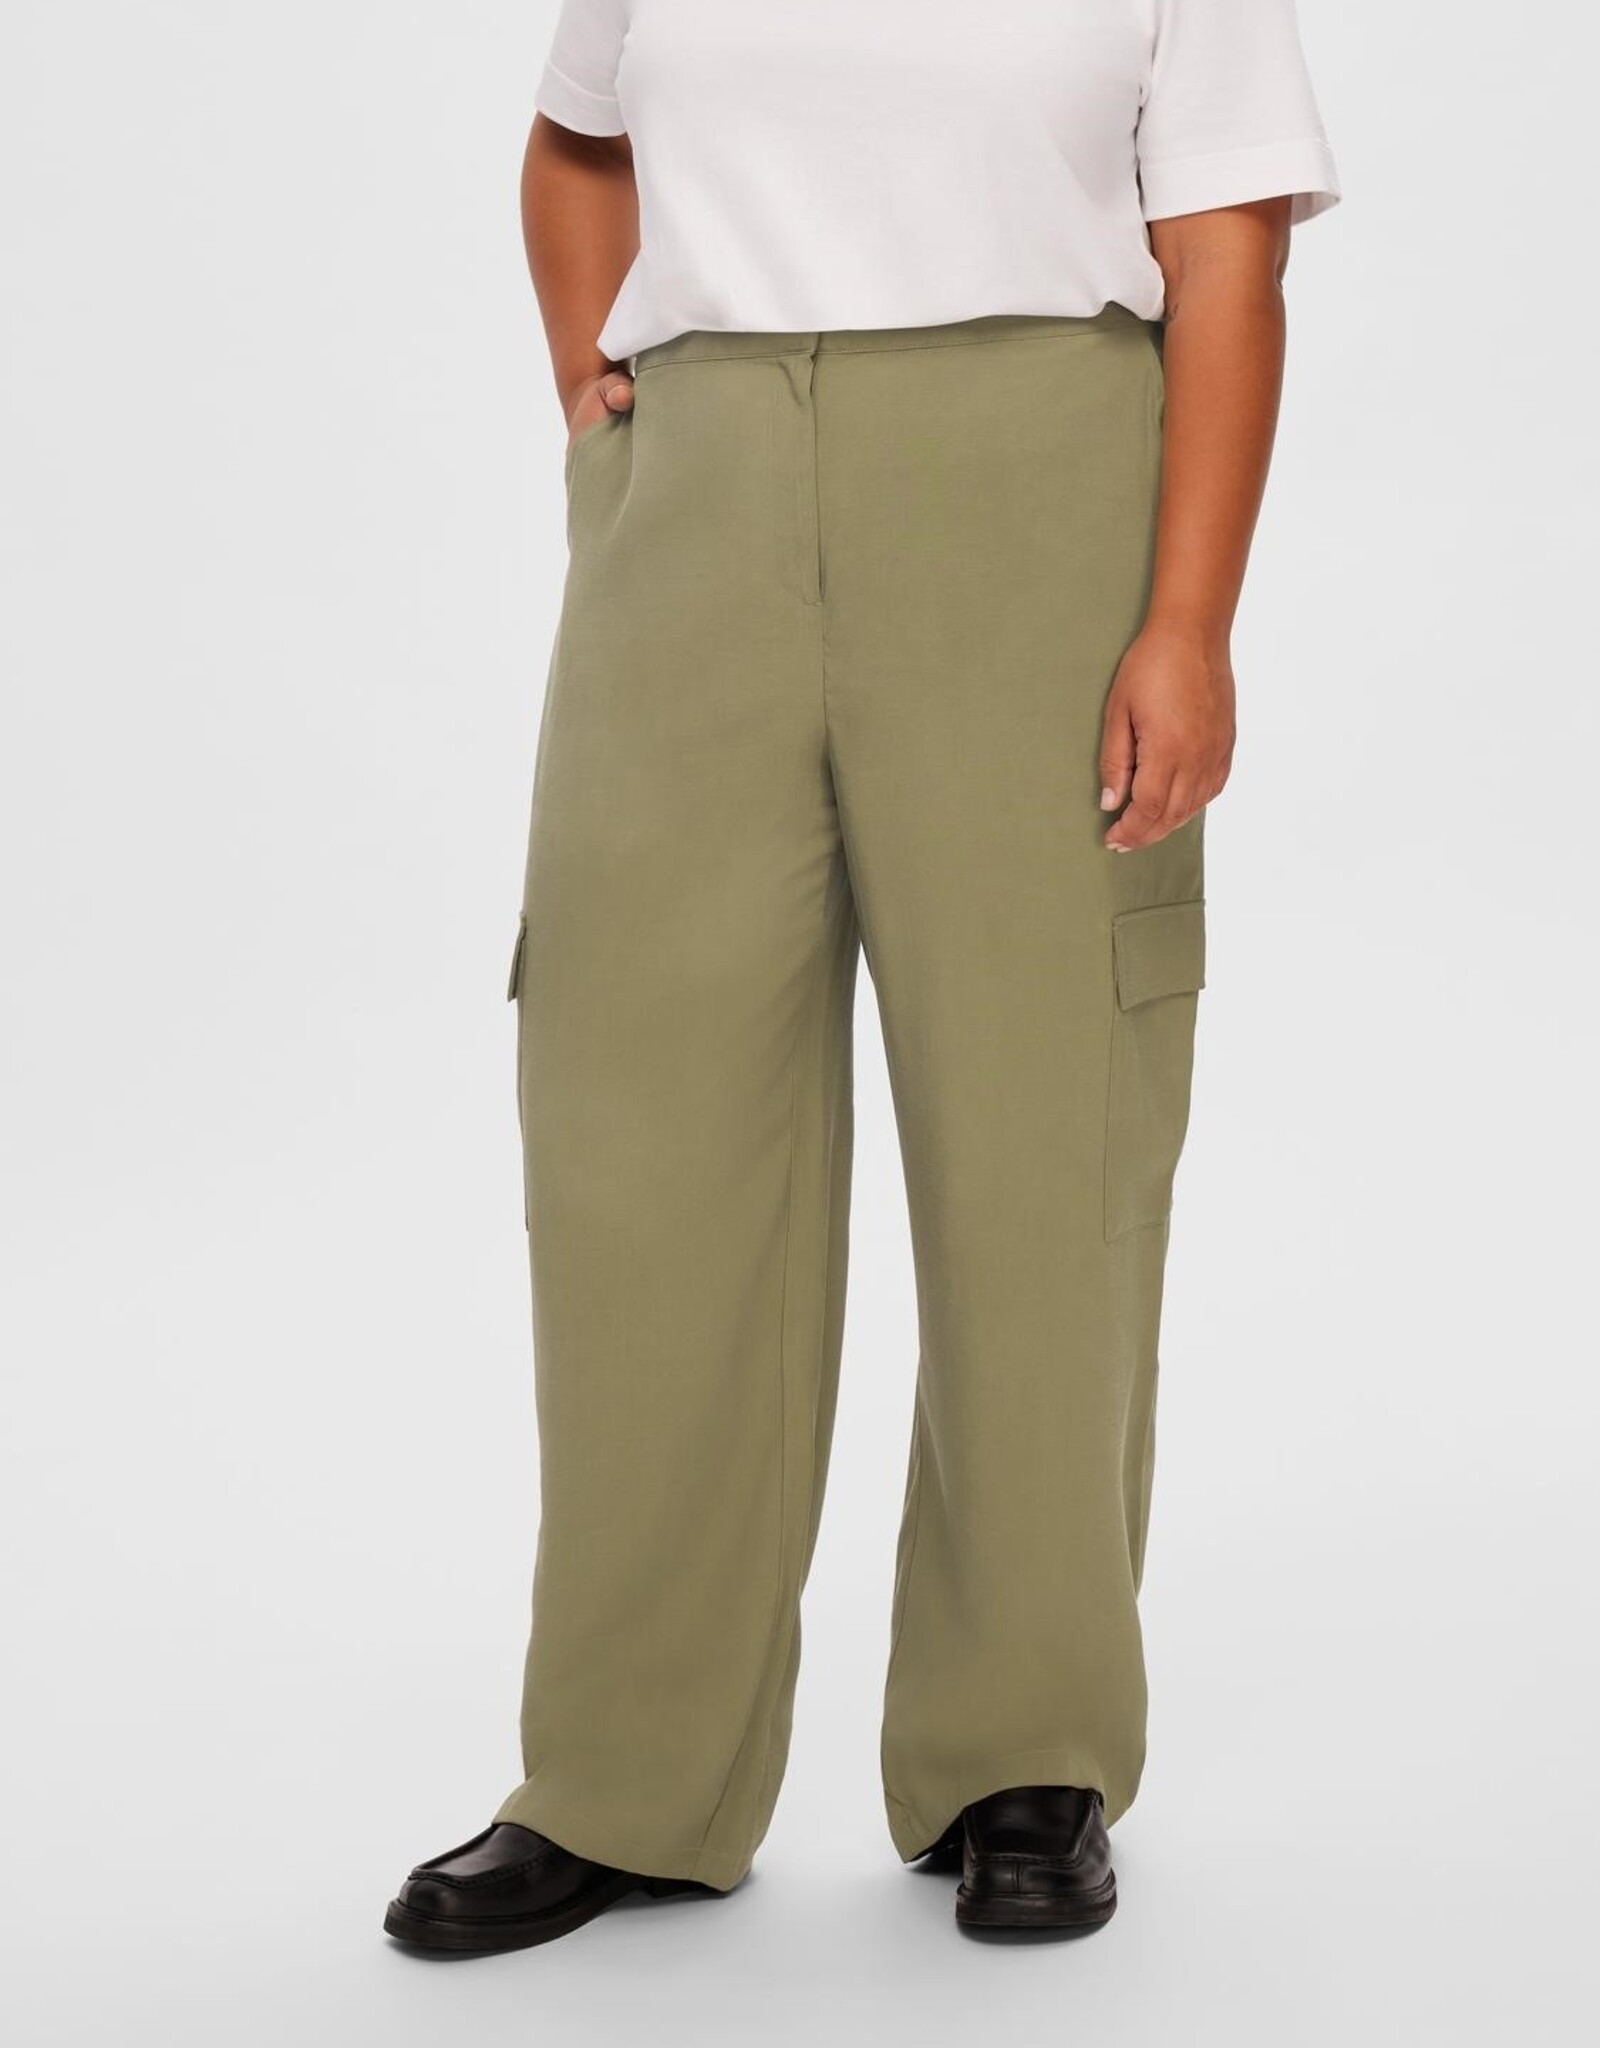 Selected Femme SELECTED FEMME EMBERLY PANTS - DUSTY GREEN